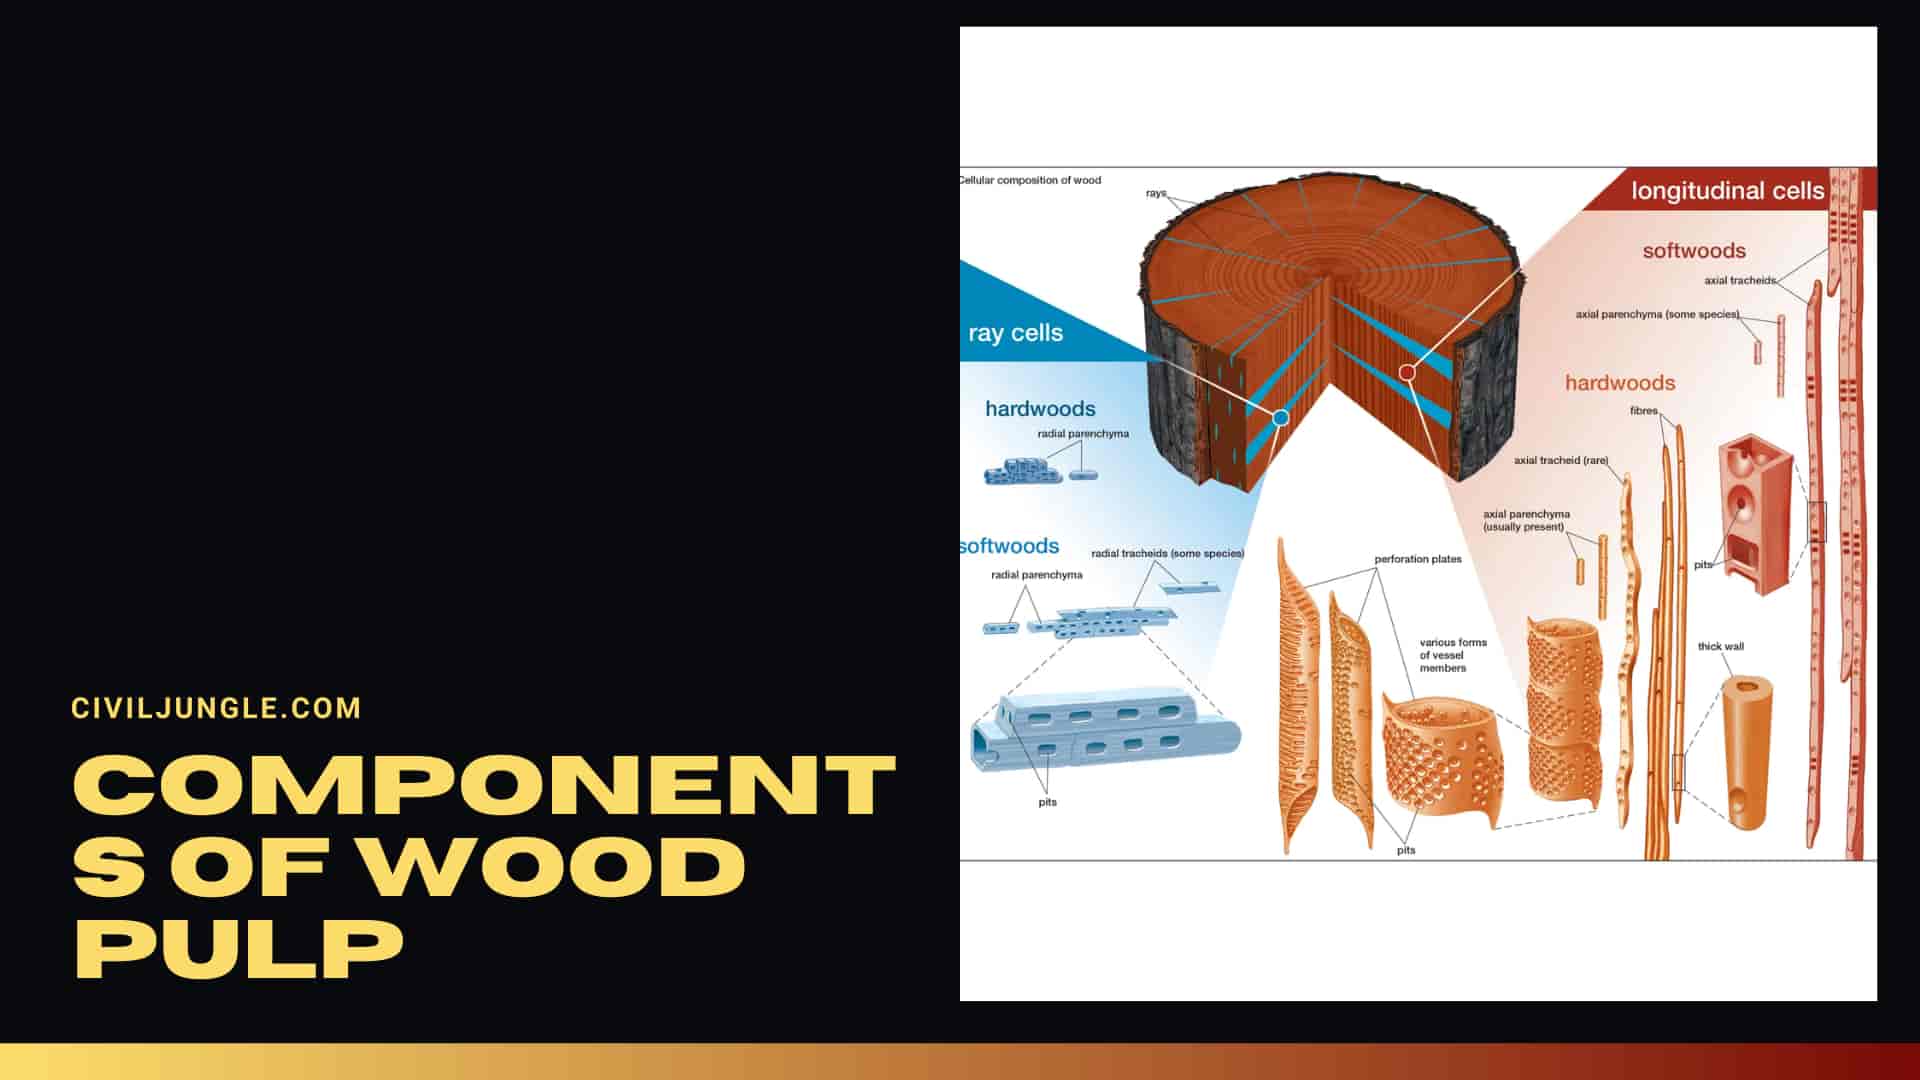 Components of Wood Pulp